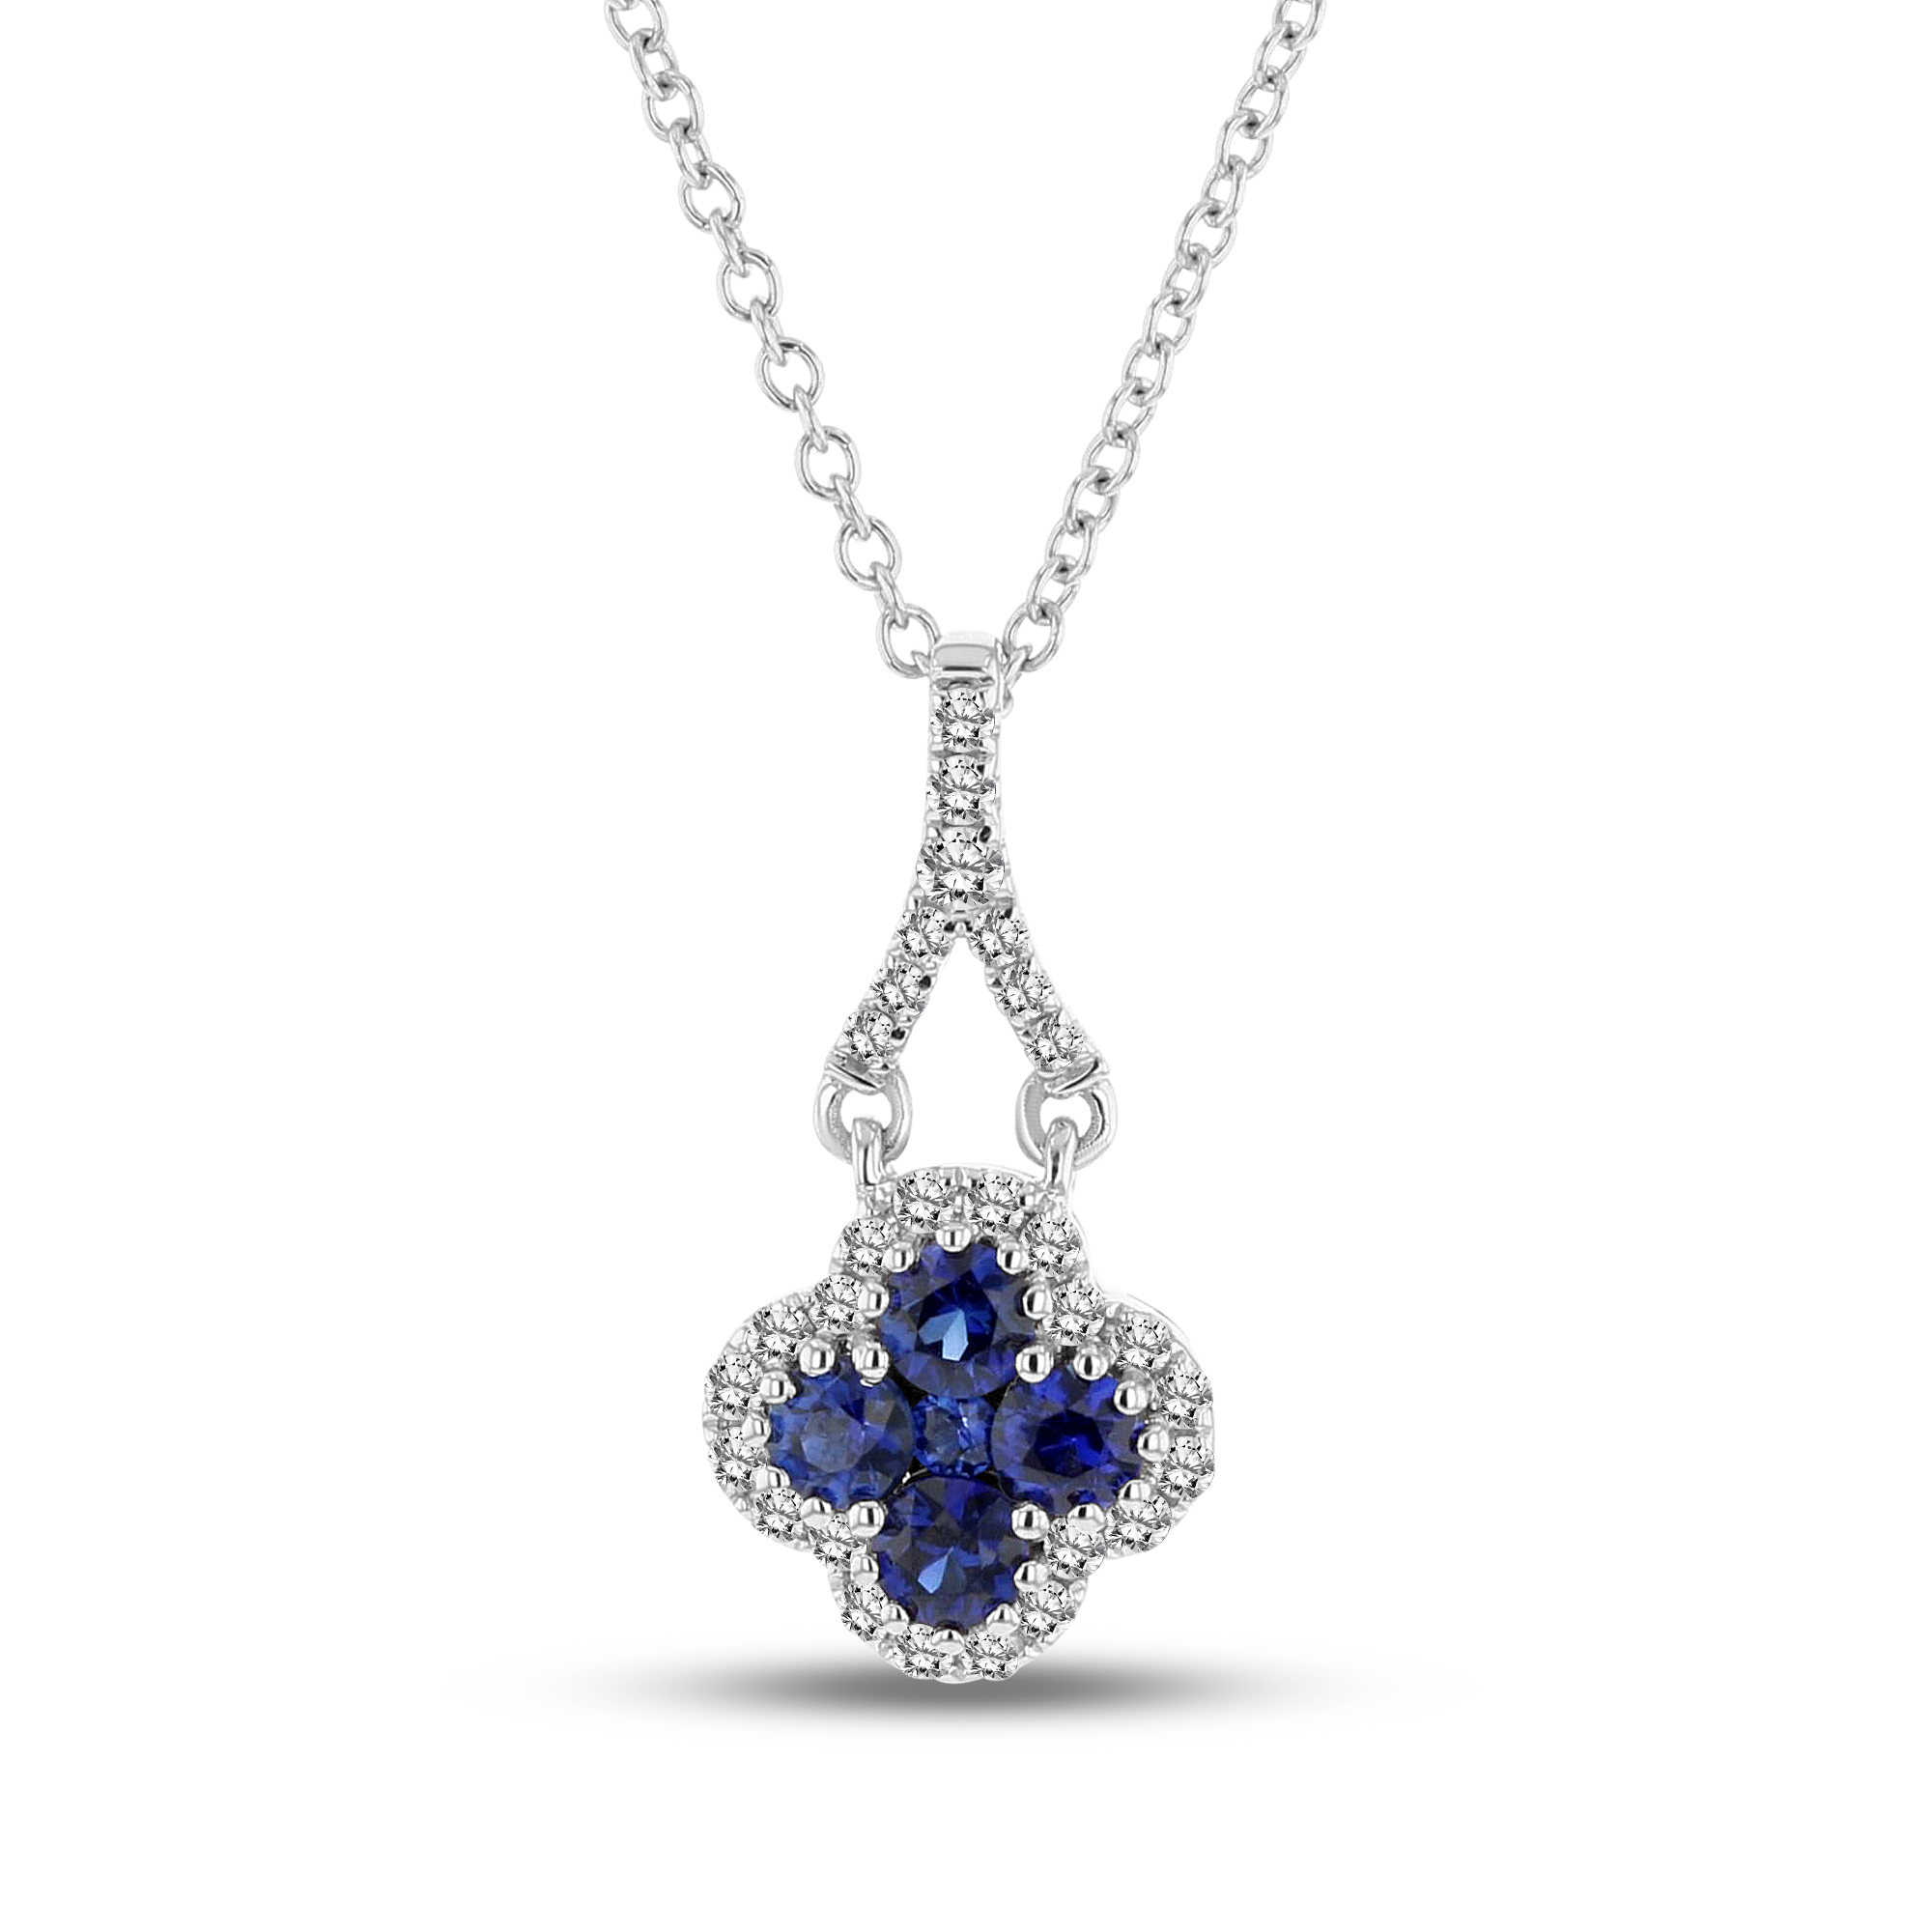 View 0.11ctw Diamond and Sapphire Clover Pendant in 18k White Gold